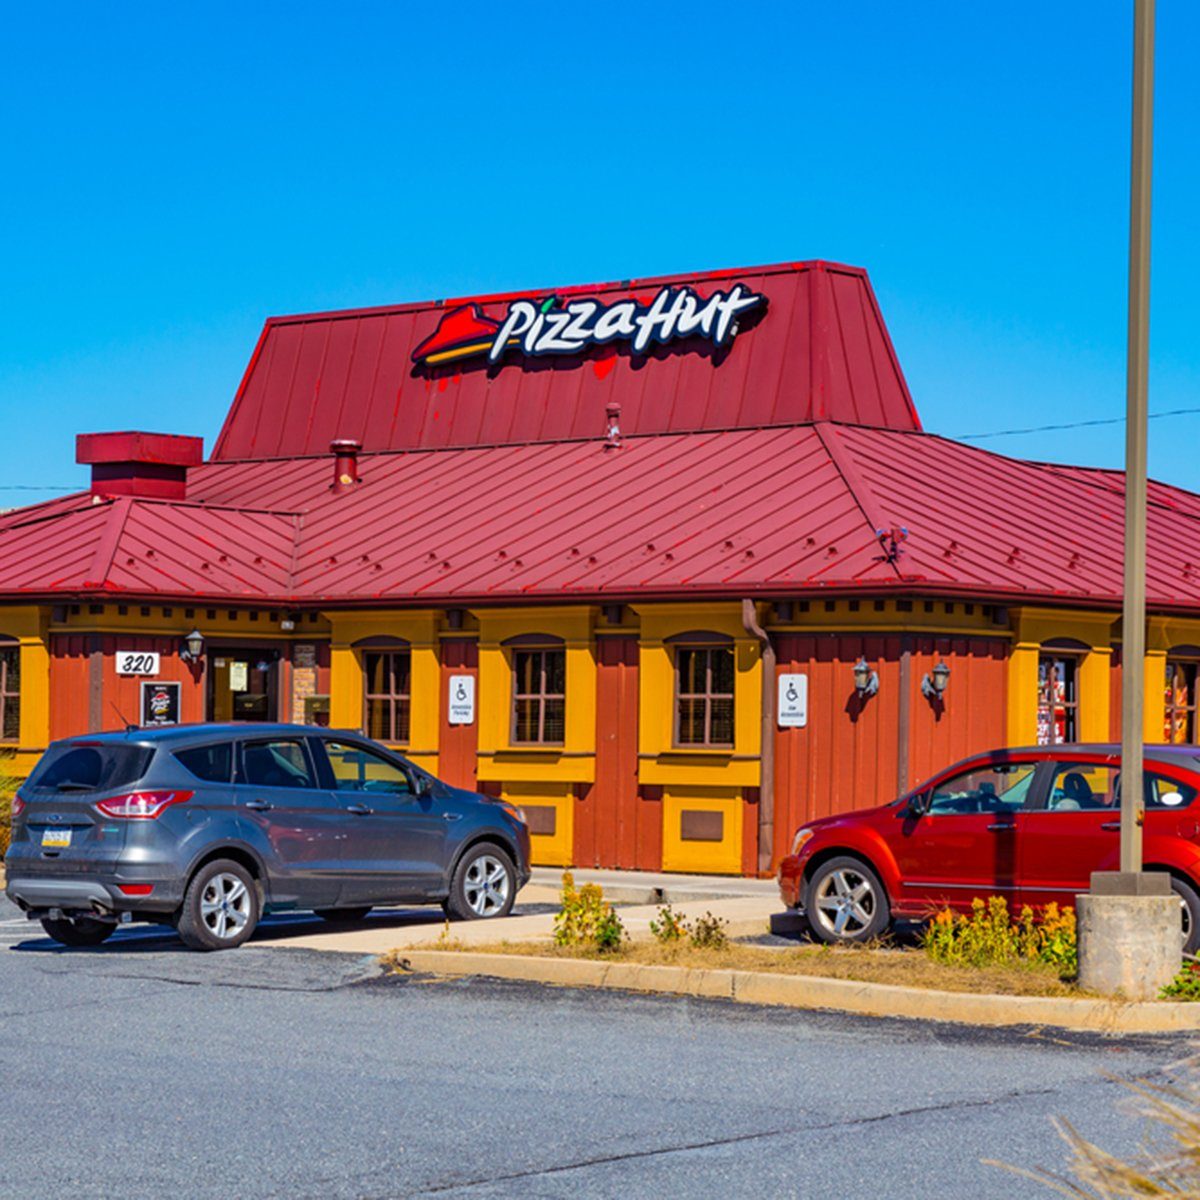 A Pizza Hut restaurant offers fresh pizzas to eat in the restaurant as well as to carryout at one of the chain's restaurants.